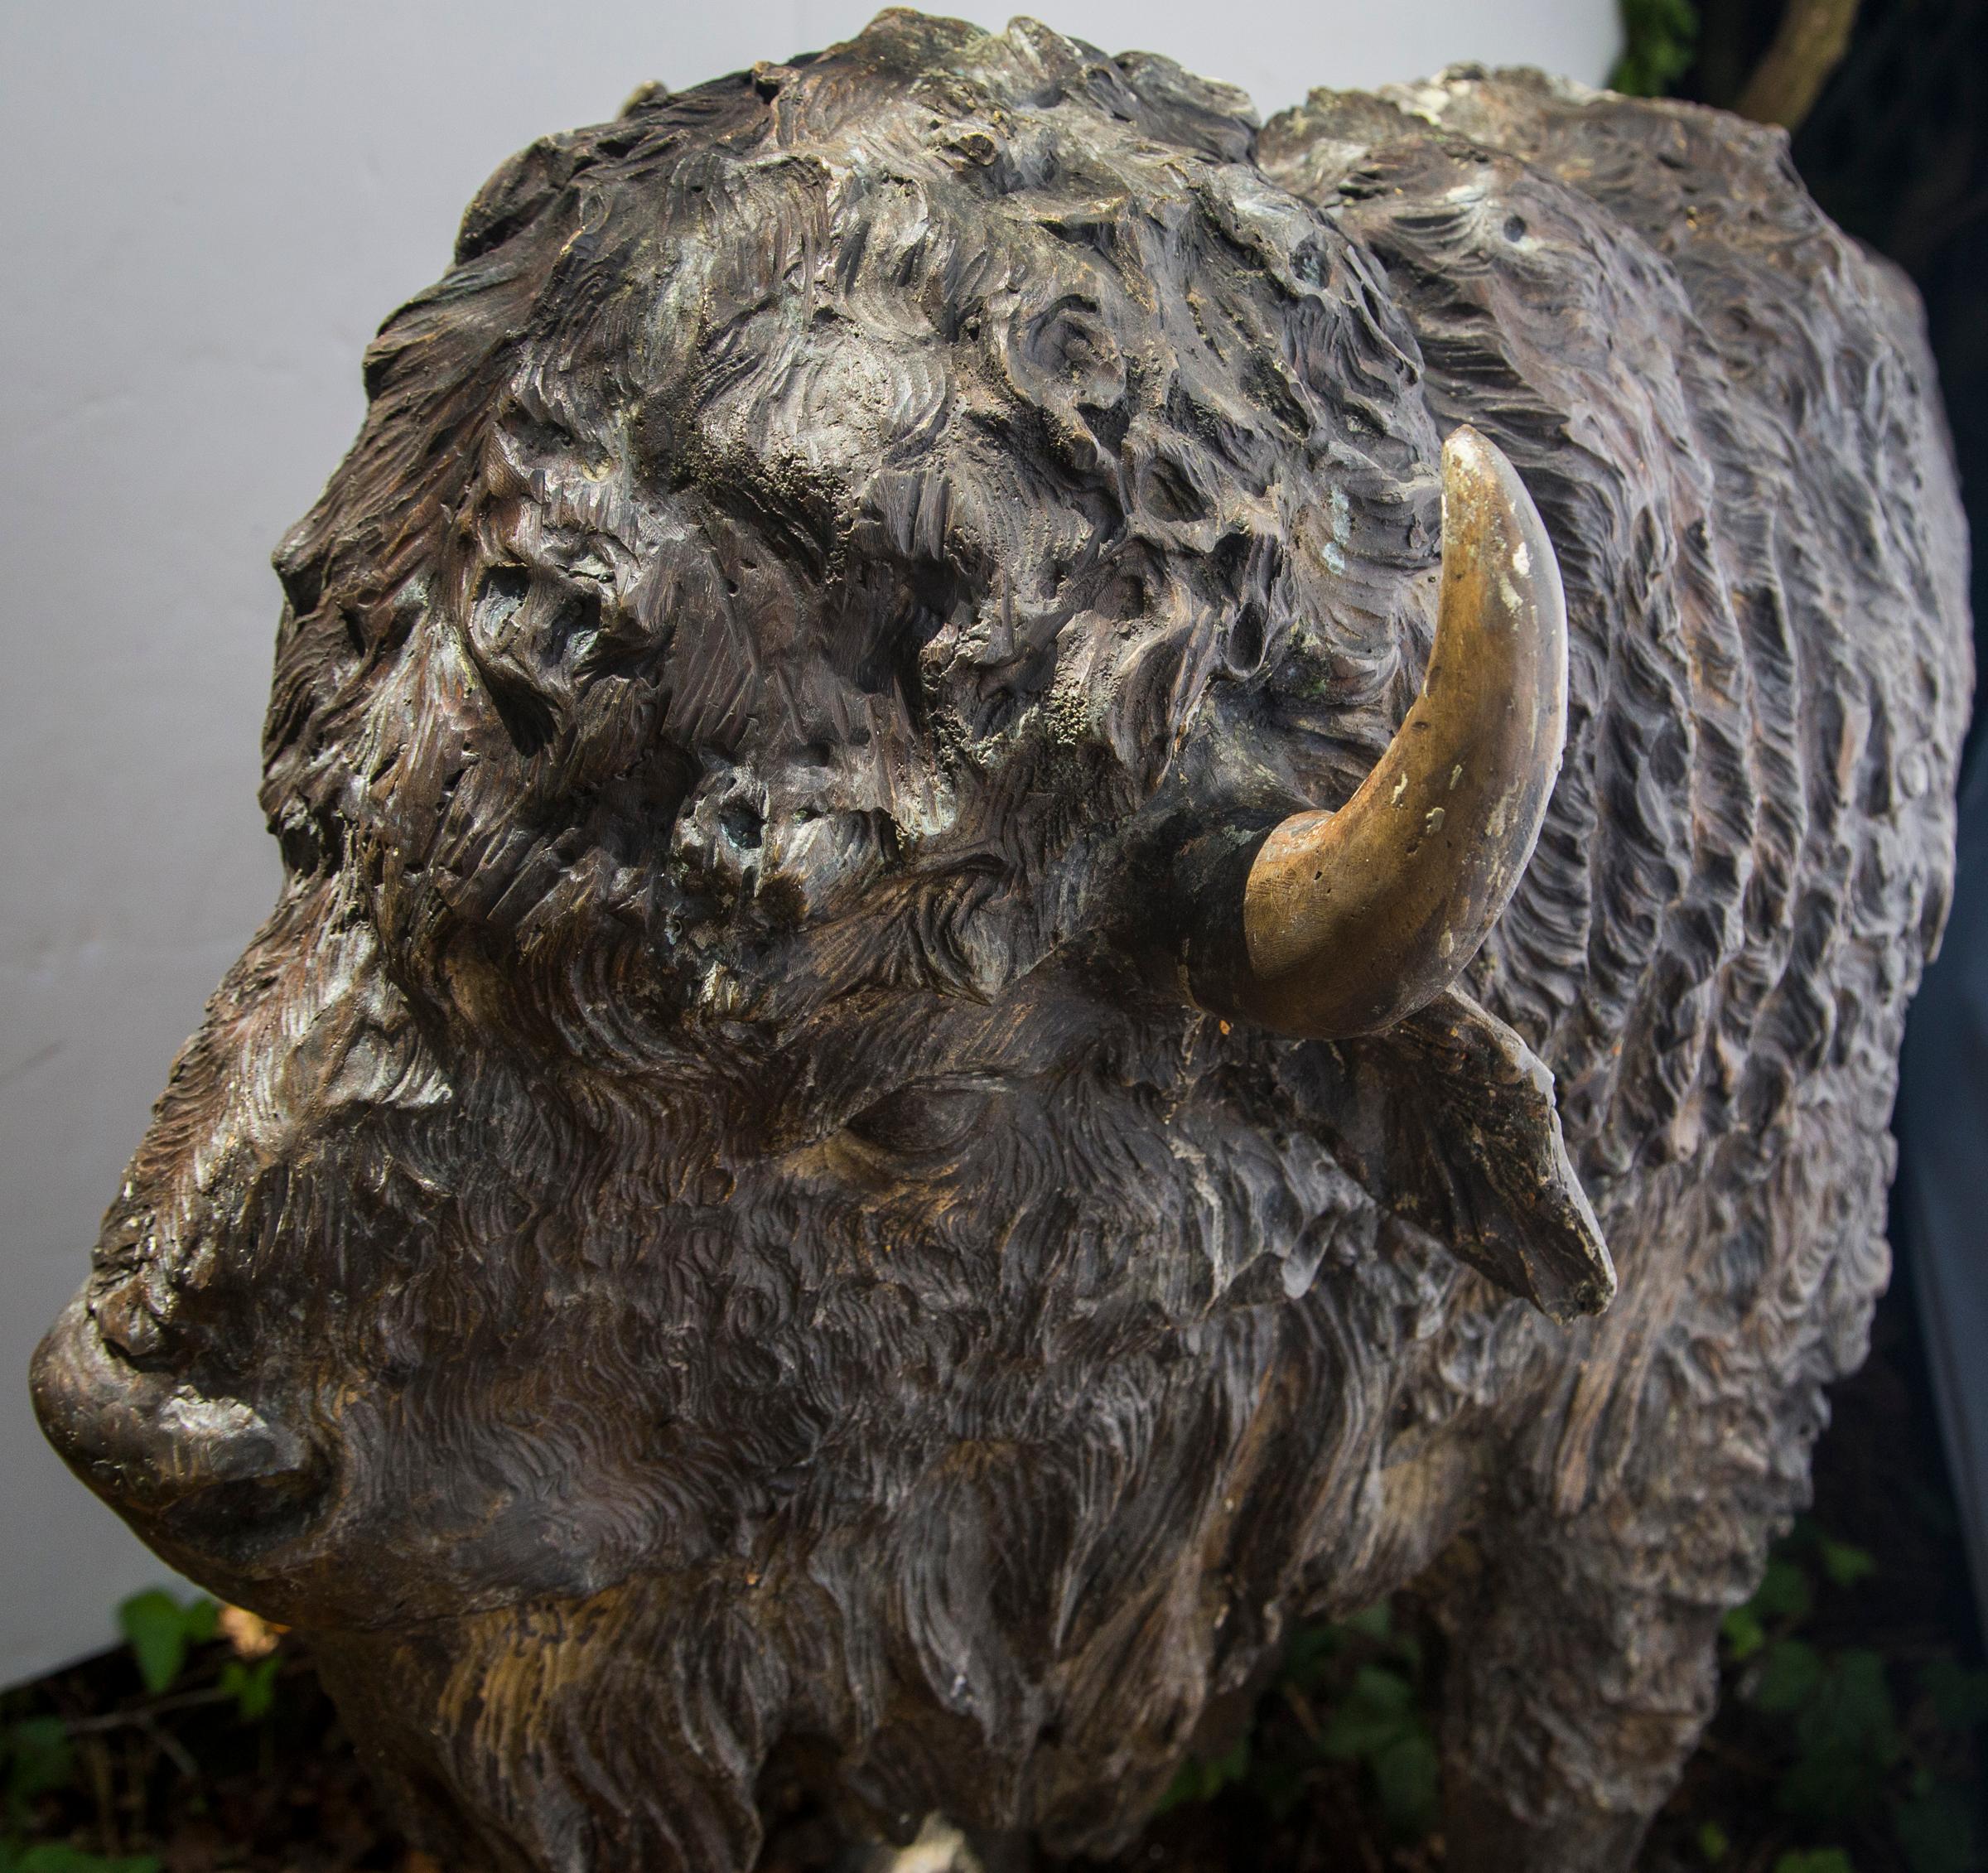 bison statues for sale